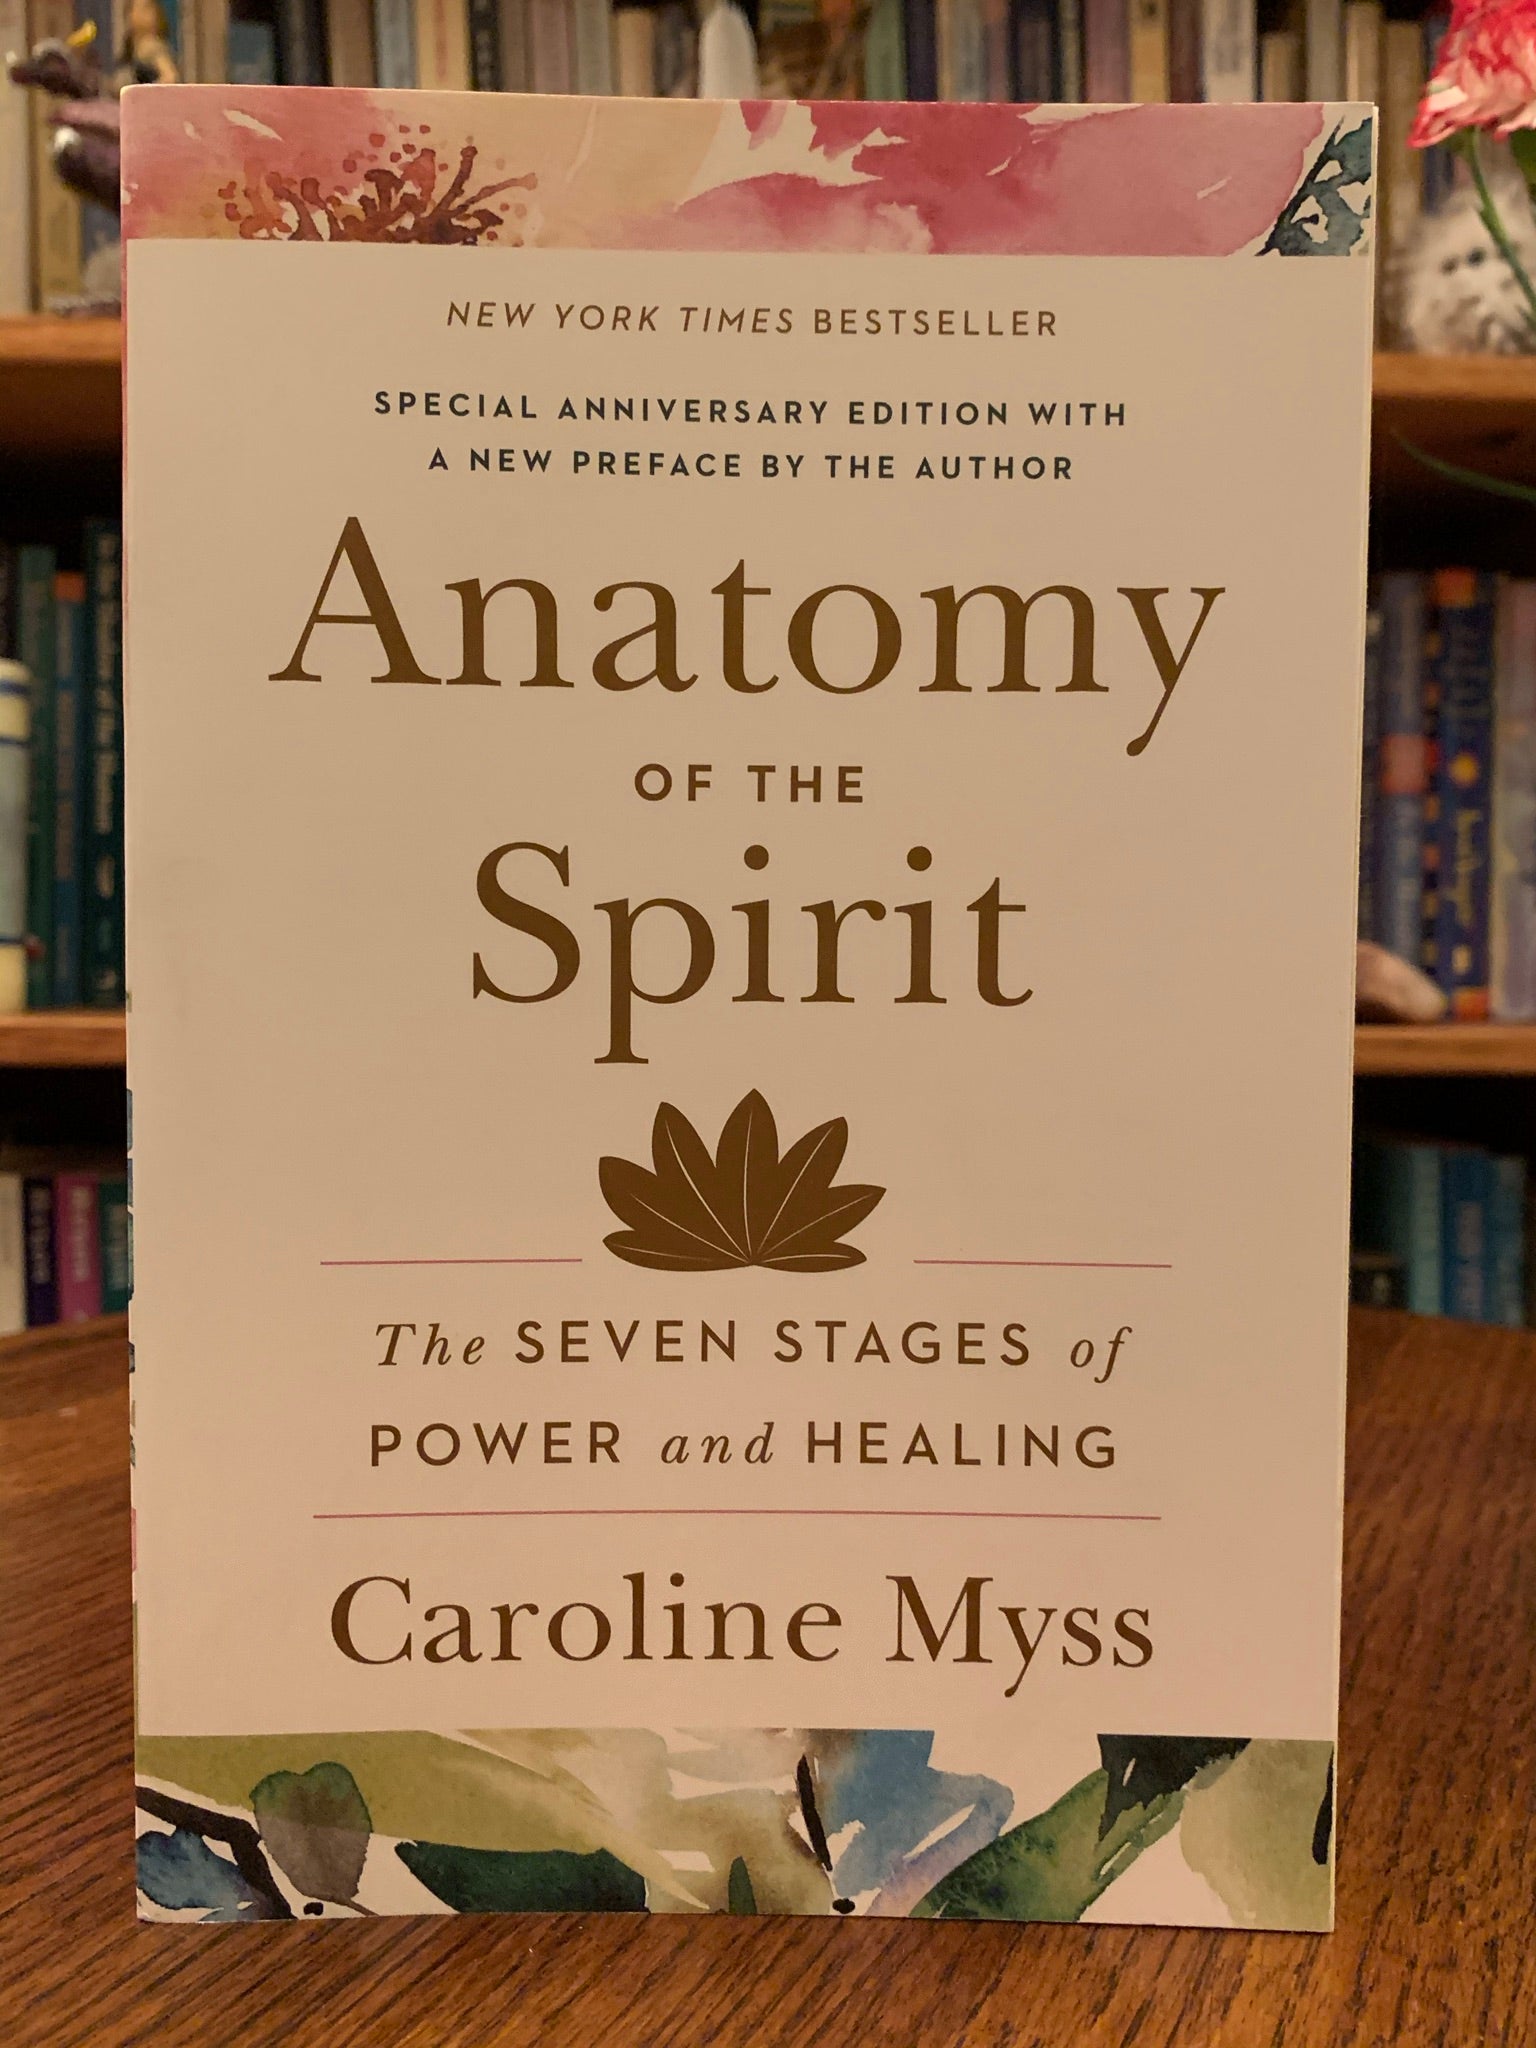 Front Cover. Anatomy of the Spirit by Caroline Myss is a book about healing through the understanding that it is emotional/psychological stresses and unhealthy attitudes and behaviors that create problems and dis-ease in our bodies - that these stresses correspond to certain parts of the body that then become imbalanced and unhealthy. $17.99